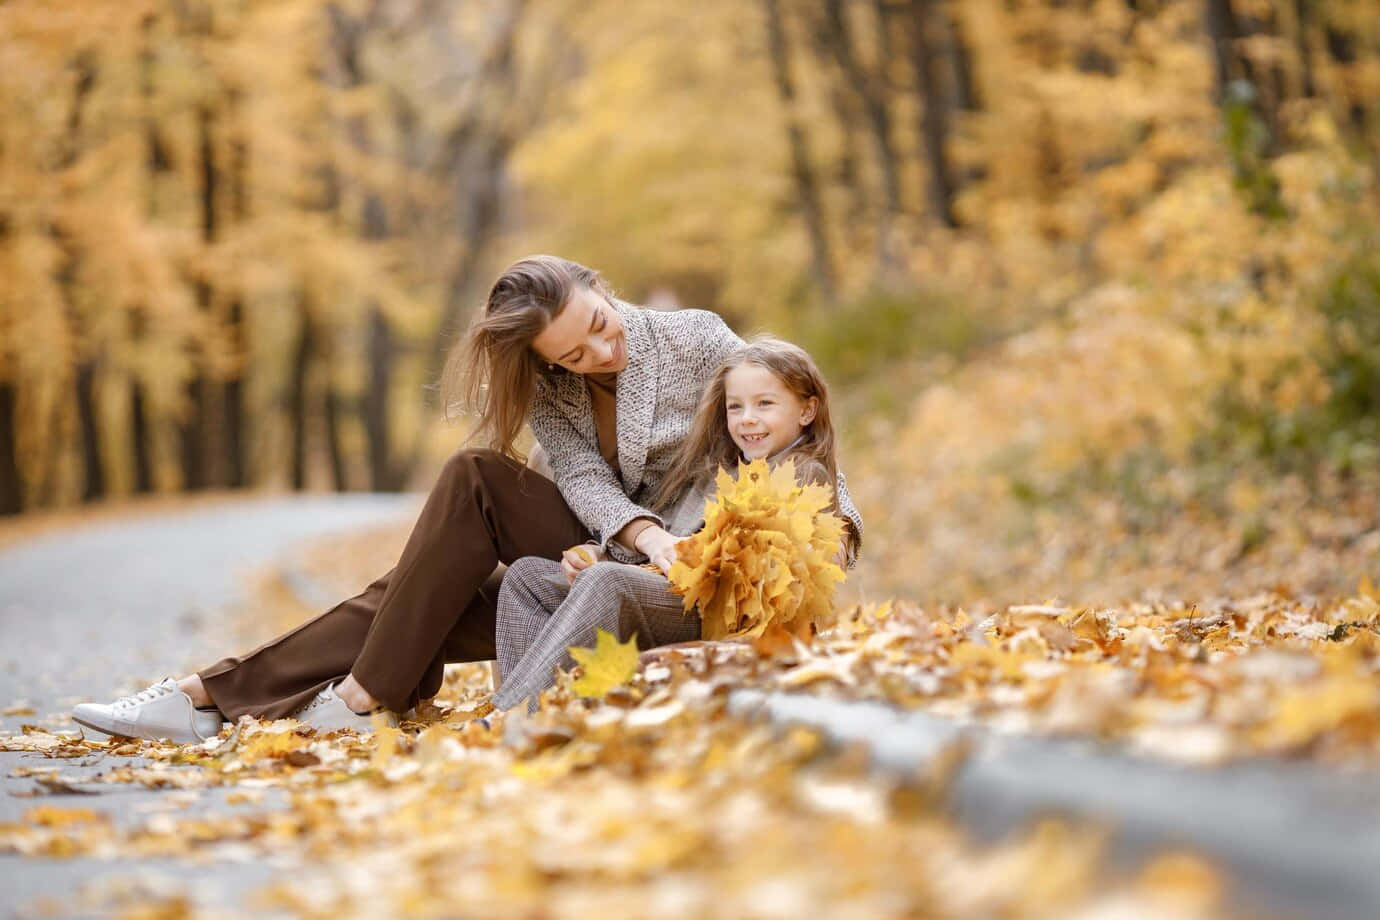 A Mother And Daughter Sitting On The Road In Autumn